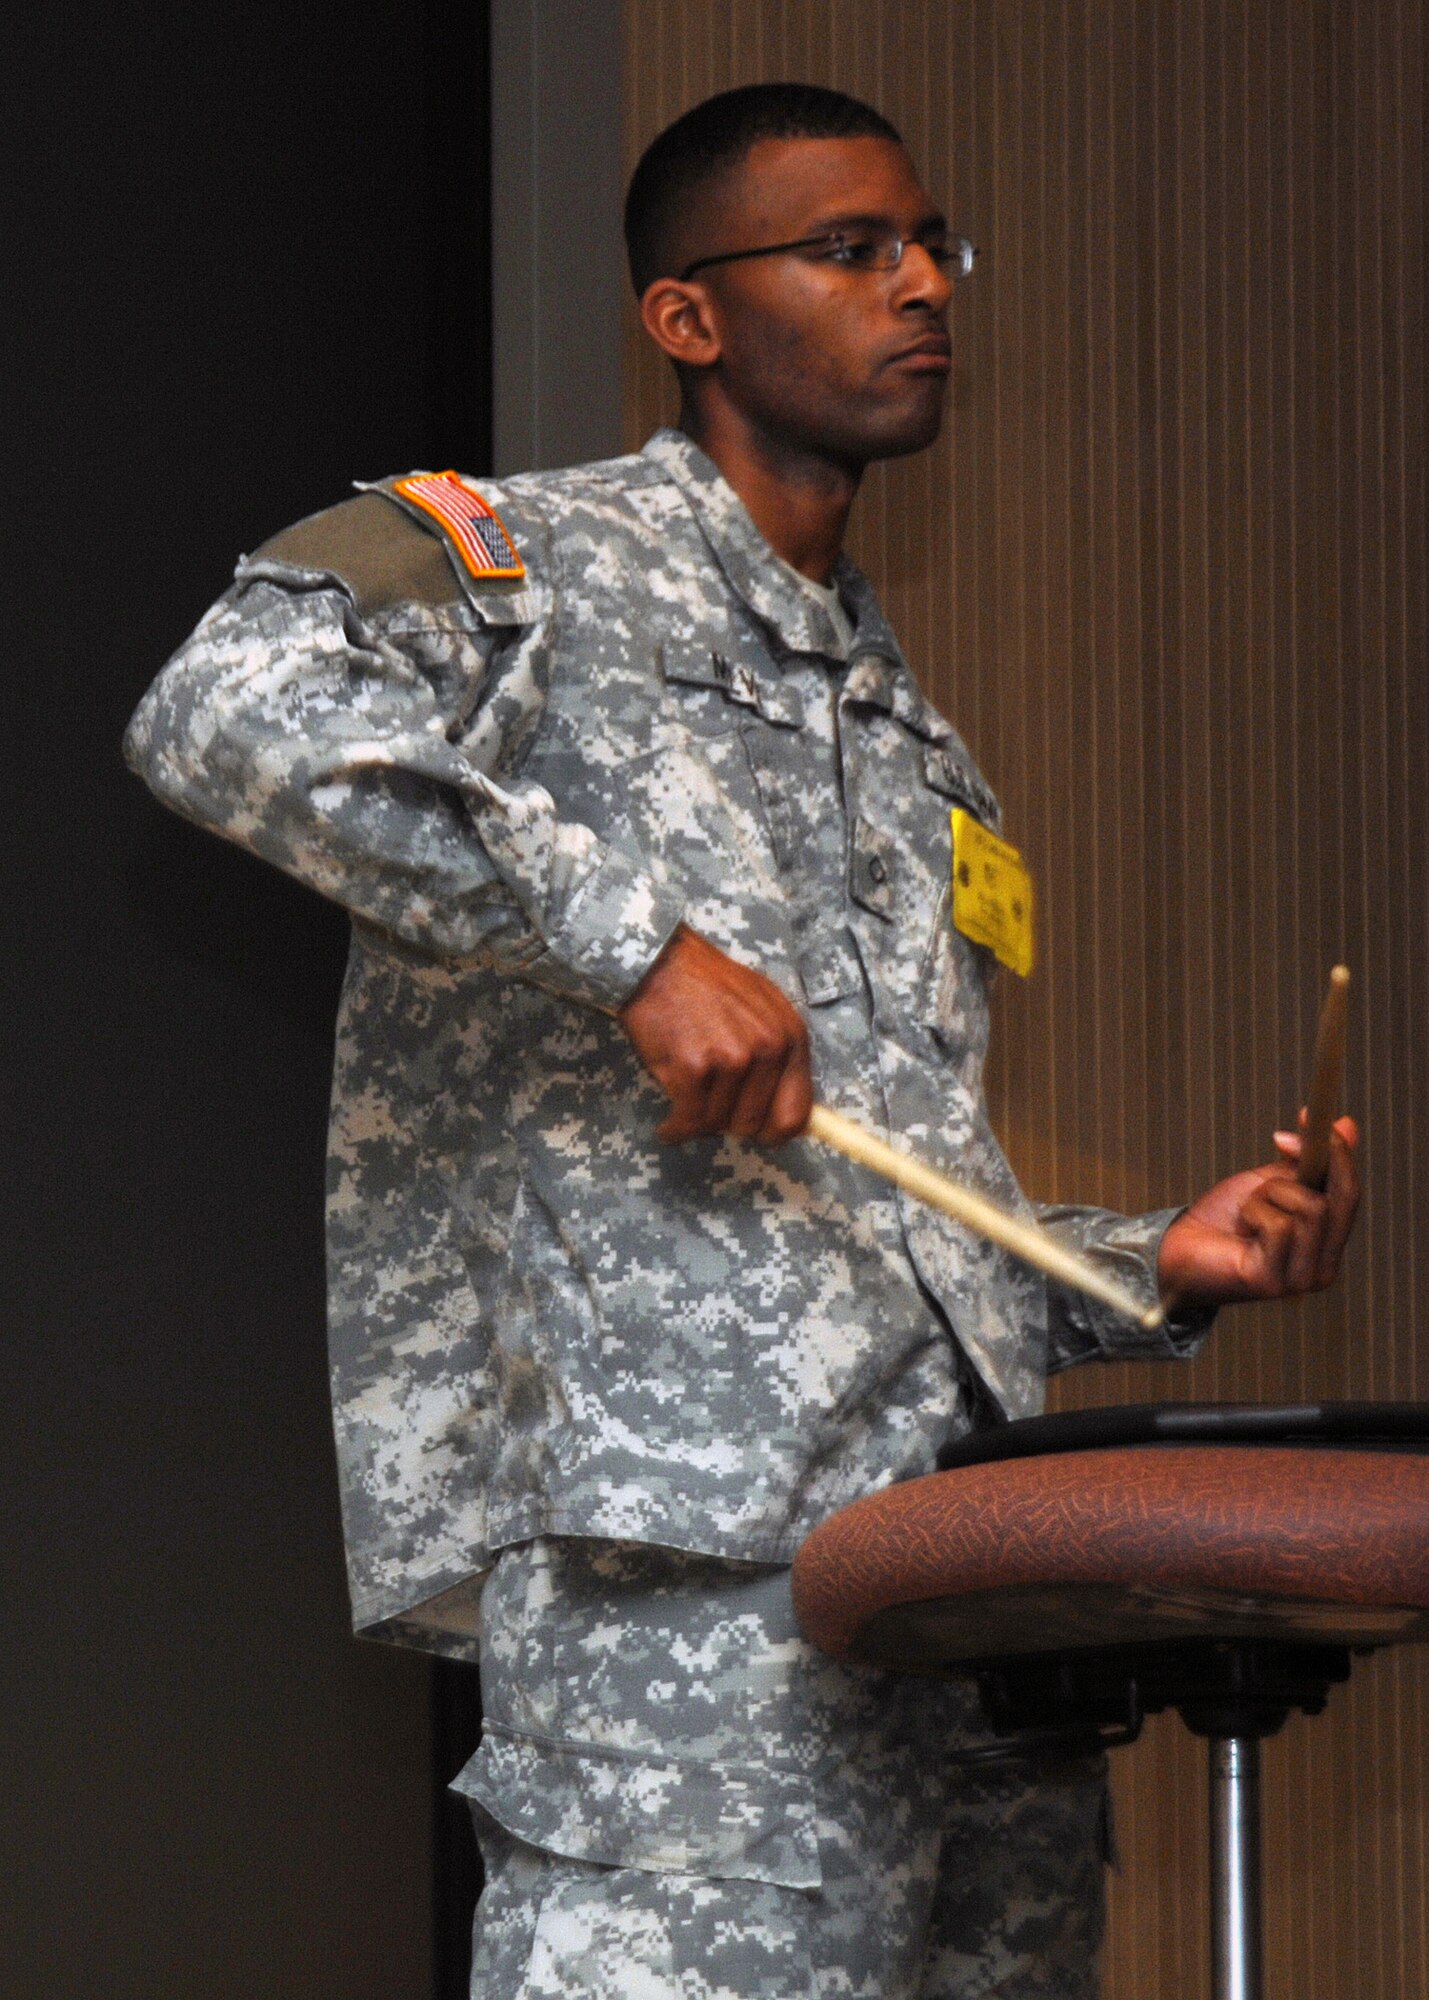 Pvt. Bobby Melvin hammers out a rhythm March 3 during an All-Army Talent Show in Bldg. 1900. Private Melvin and other Soldiers from D Company, 264th Medical Battalion at Sheppard Air Force Base competed in the show. Here are the results of the show: 1st Place - Pvt. Christopher McLaughlin; 2nd Place - Pvt. Samantha Hinkley; and 3rd Place - Spc. Willard Wilson. (U.S. Air Force photo/Lou Anne Sledge)